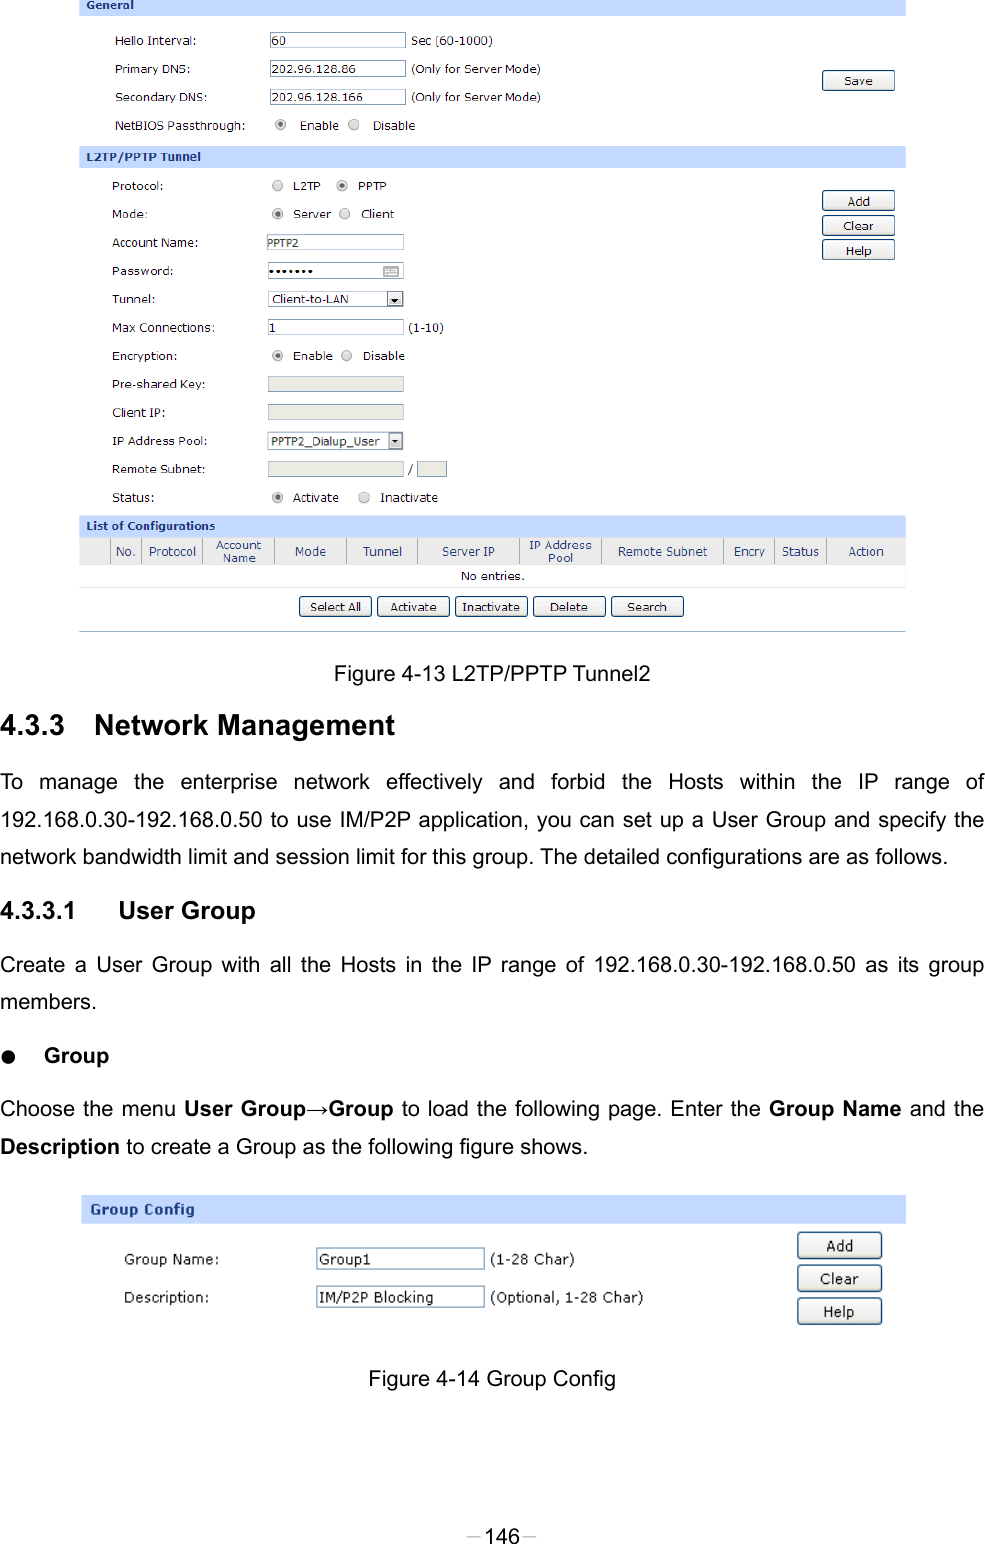   Figure 4-13 L2TP/PPTP Tunnel2 4.3.3 Network Management To manage the enterprise network effectively and forbid the Hosts within the IP range of 192.168.0.30-192.168.0.50 to use IM/P2P application, you can set up a User Group and specify the network bandwidth limit and session limit for this group. The detailed configurations are as follows. 4.3.3.1 User Group Create a User Group with all the Hosts in the IP range of 192.168.0.30-192.168.0.50 as its group members. ● Group Choose the menu User Group→Group to load the following page. Enter the Group Name and the Description to create a Group as the following figure shows.  Figure 4-14 Group Config -146- 